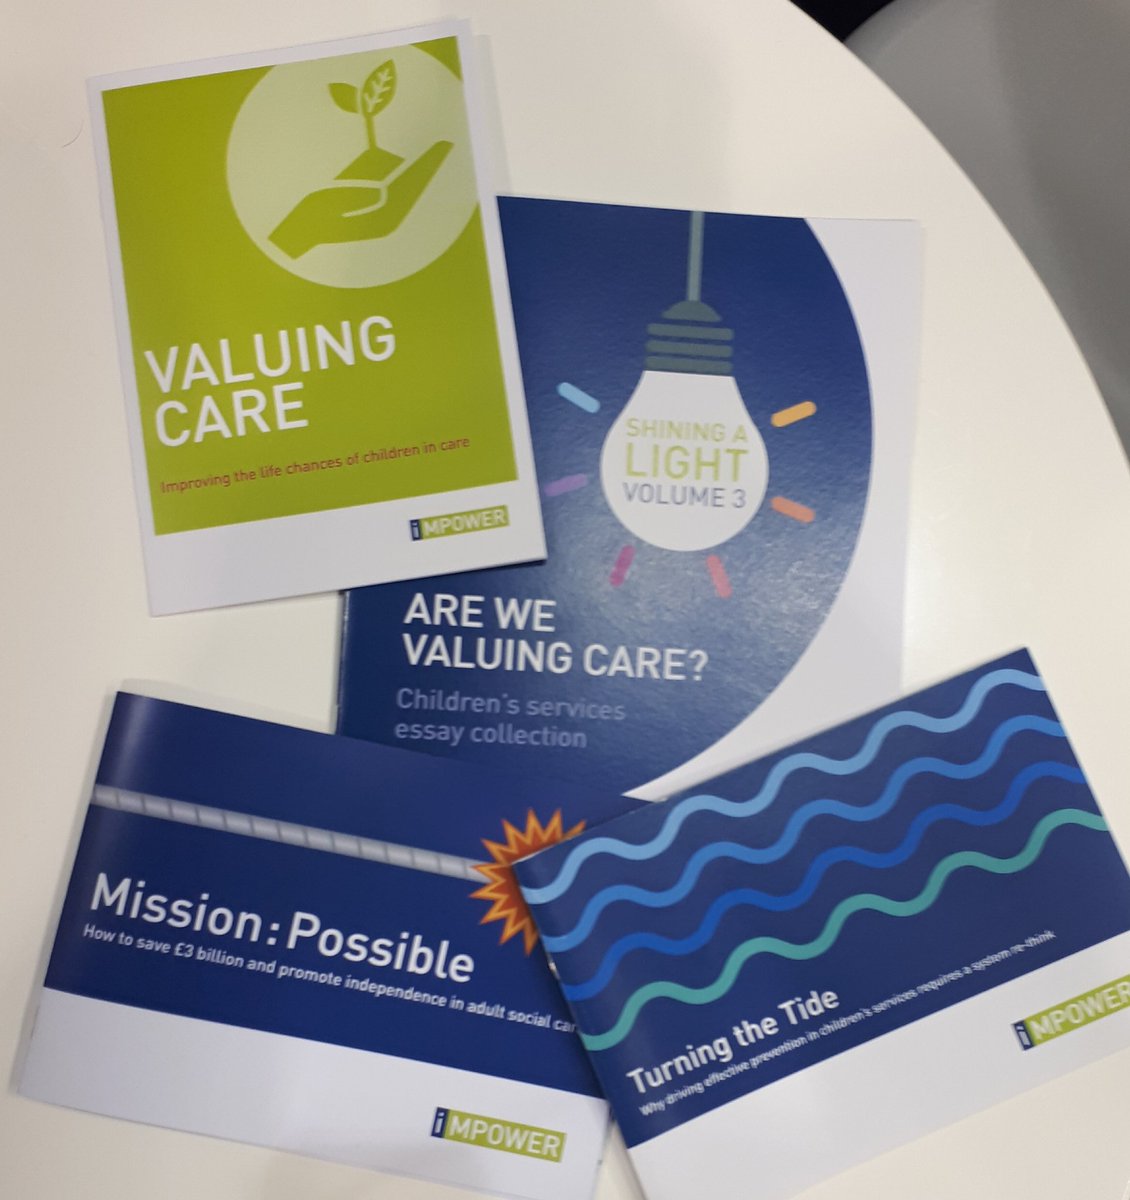 Our reports are proving very popular so come & take a look 👀 & grab some copies at stand C30 #ncasc18 #ValuingCare #demand #essaycollection #localgov